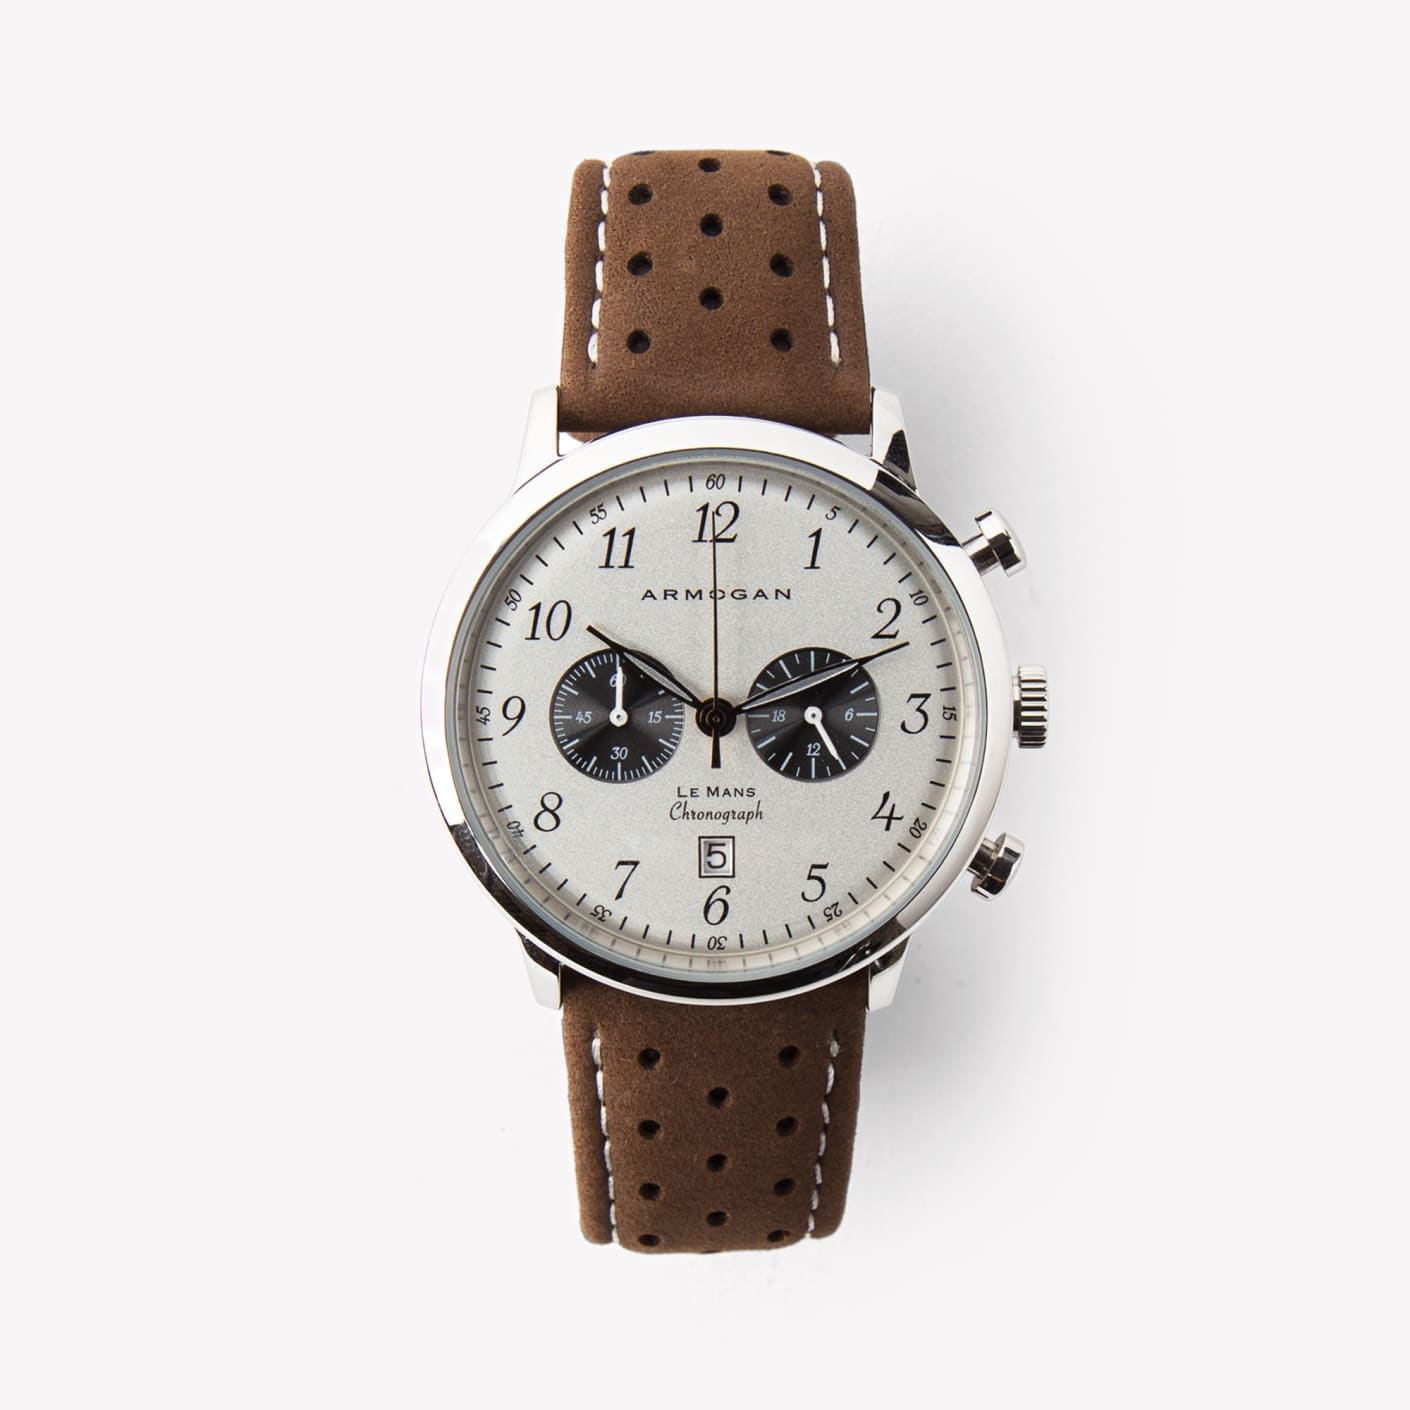 Armogan Le Mans Watch – Leather Brown Strap | Bespoke Post